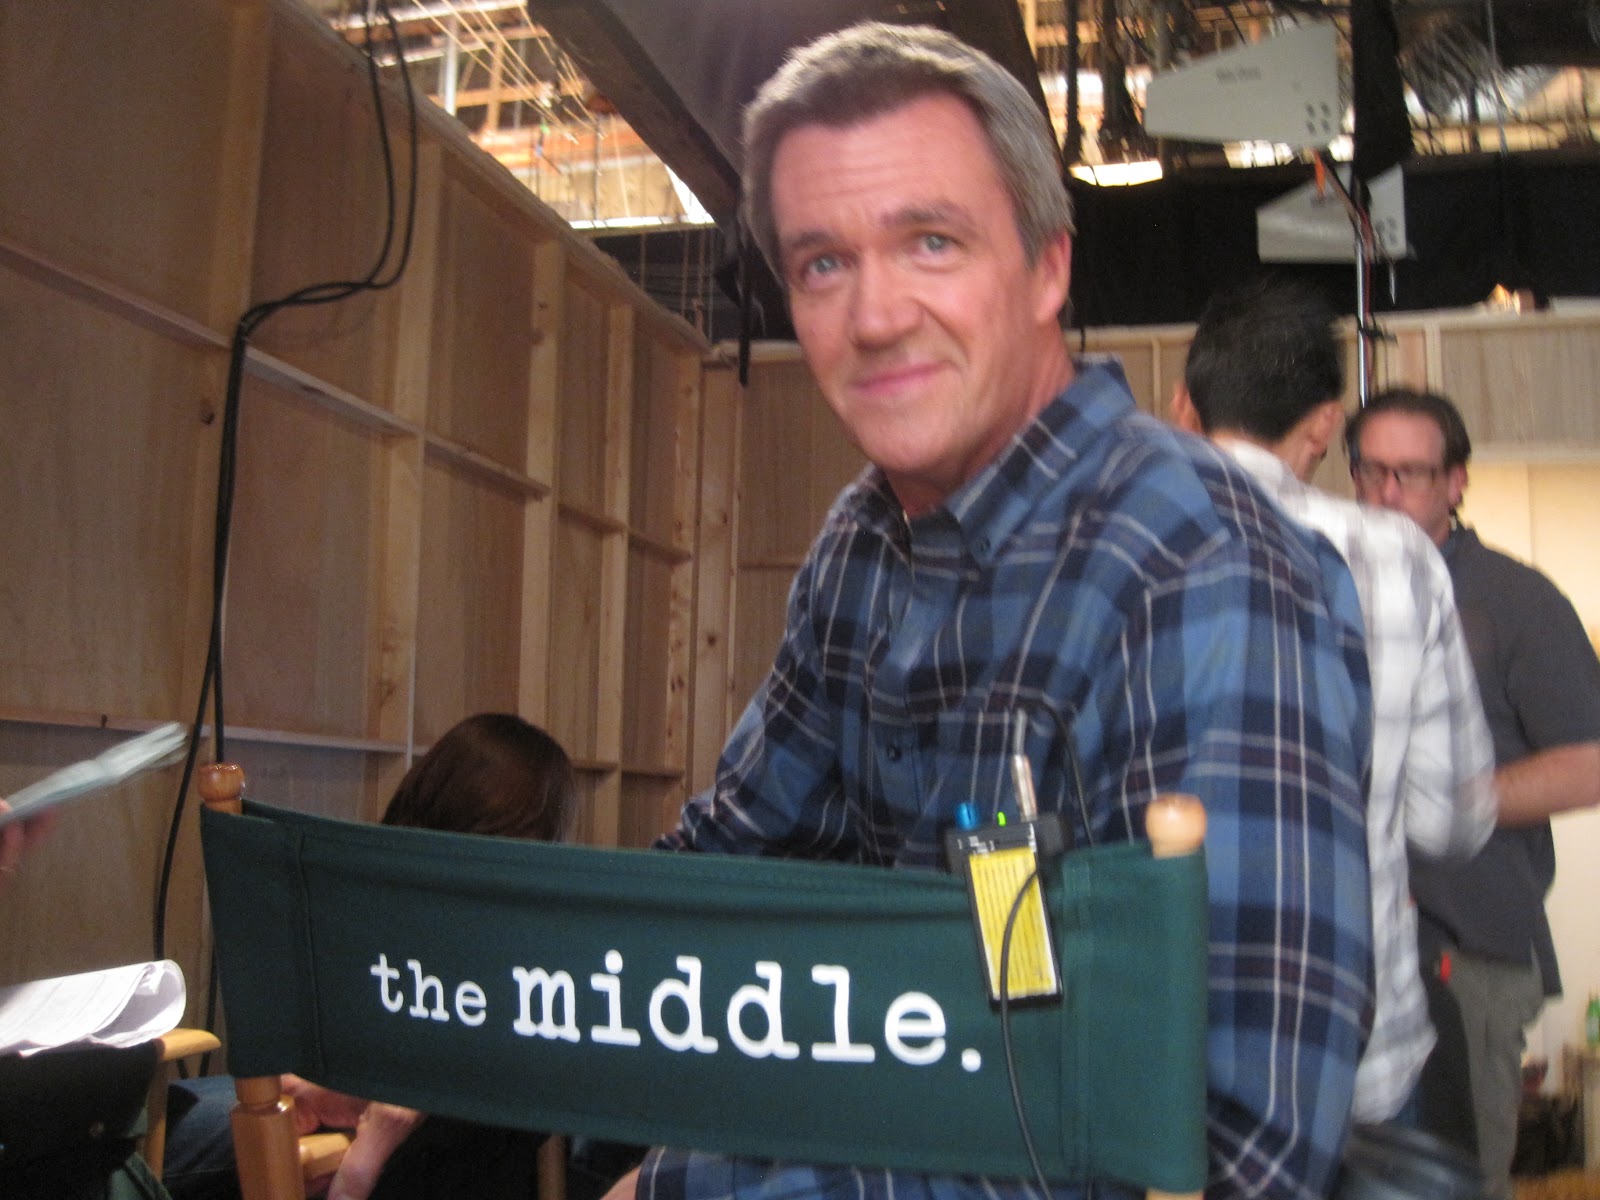 neil flynn, height, the janitor, scrubs, abc sitcom, the middle, show, actors, comedian, neil flynn height,